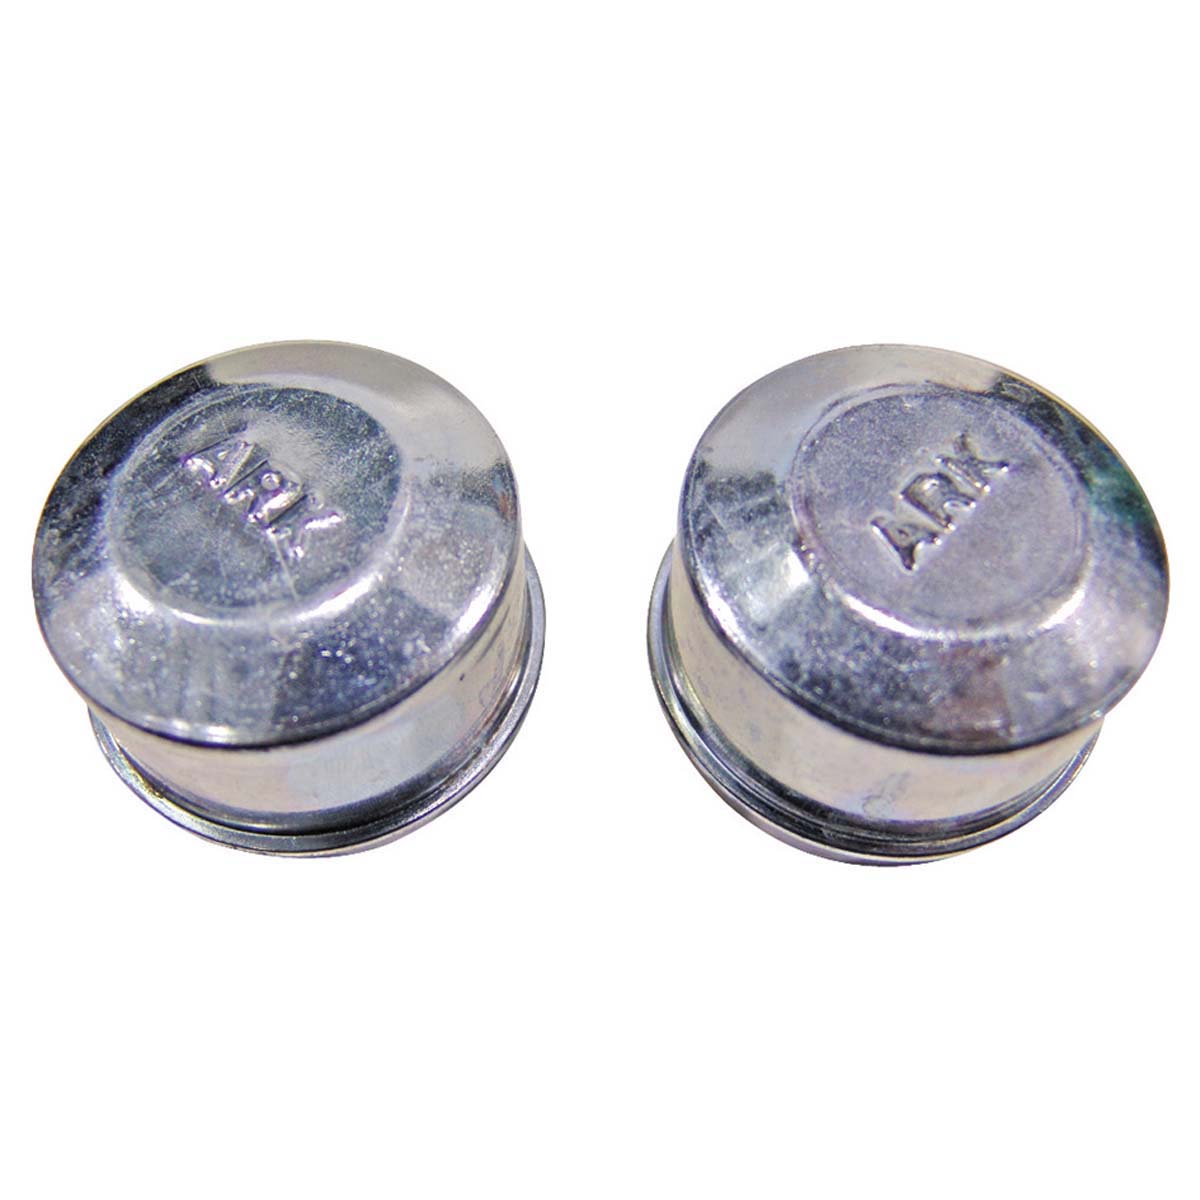 ARK Zinc Plated Bearing Dust Cover 2 Pack